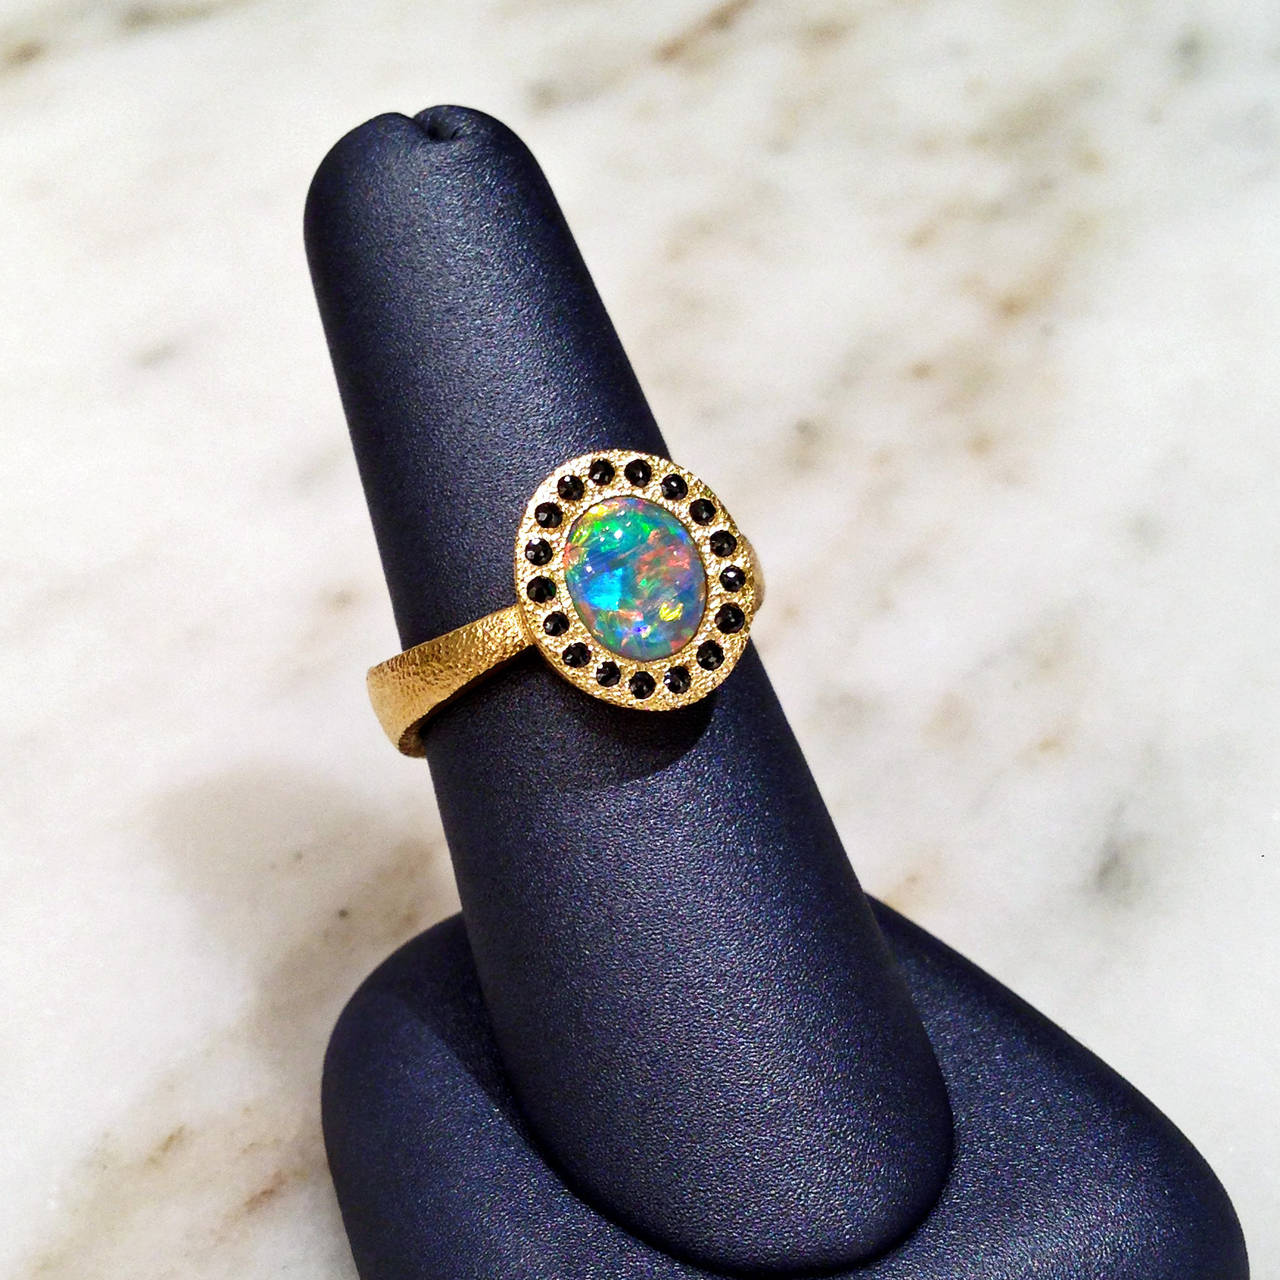 Ring handcrafted in 22k yellow gold with a spectacular Lighting Ridge opal crystal showcasing rare red flash and surrounded by rose-cut black diamonds. Size 8 (Can be Sized).